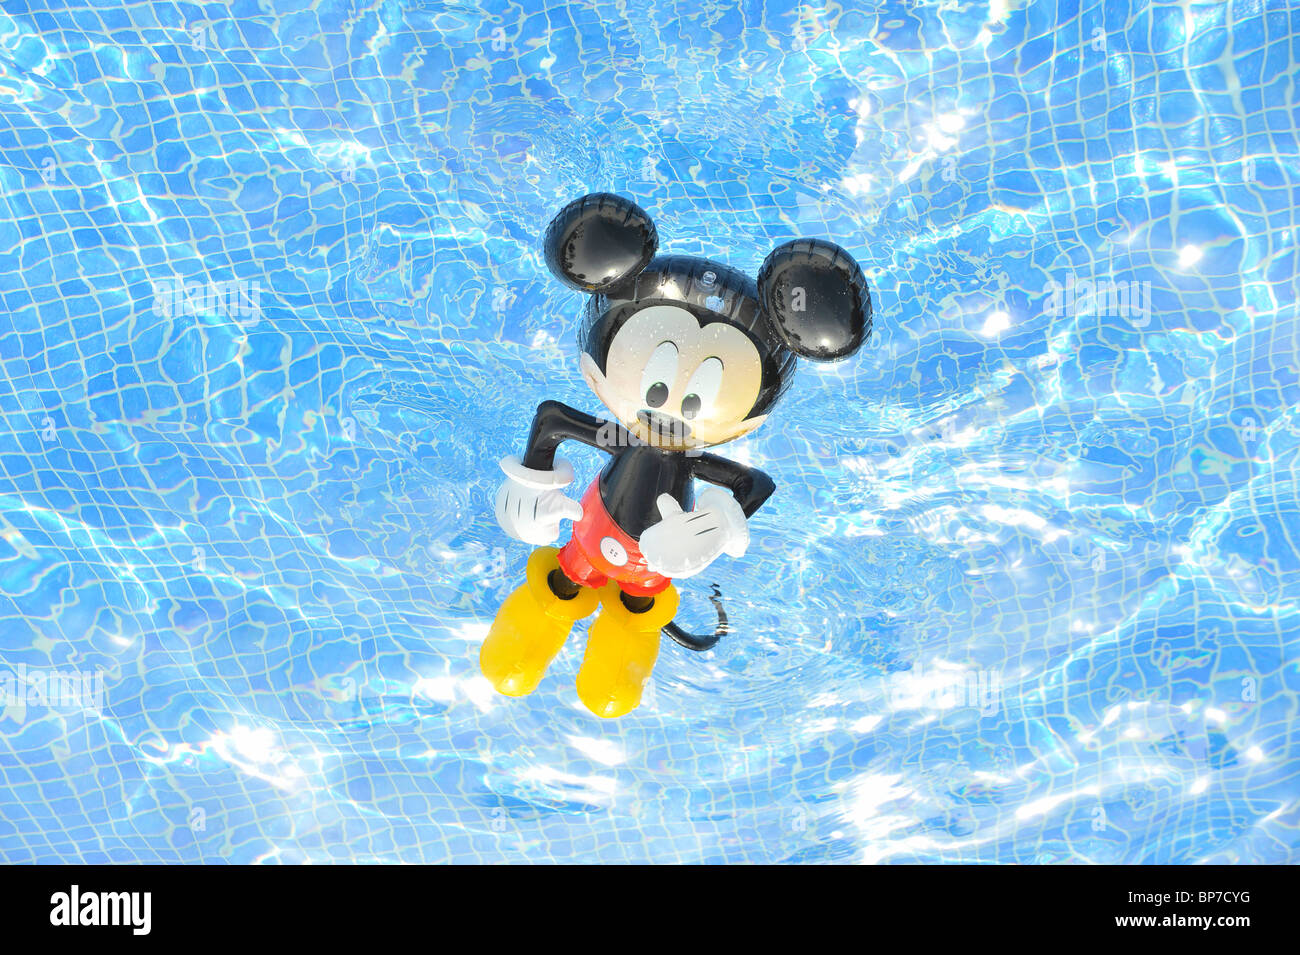 mickey mouse inflatable toy in swimming pool Stock Photo - Alamy